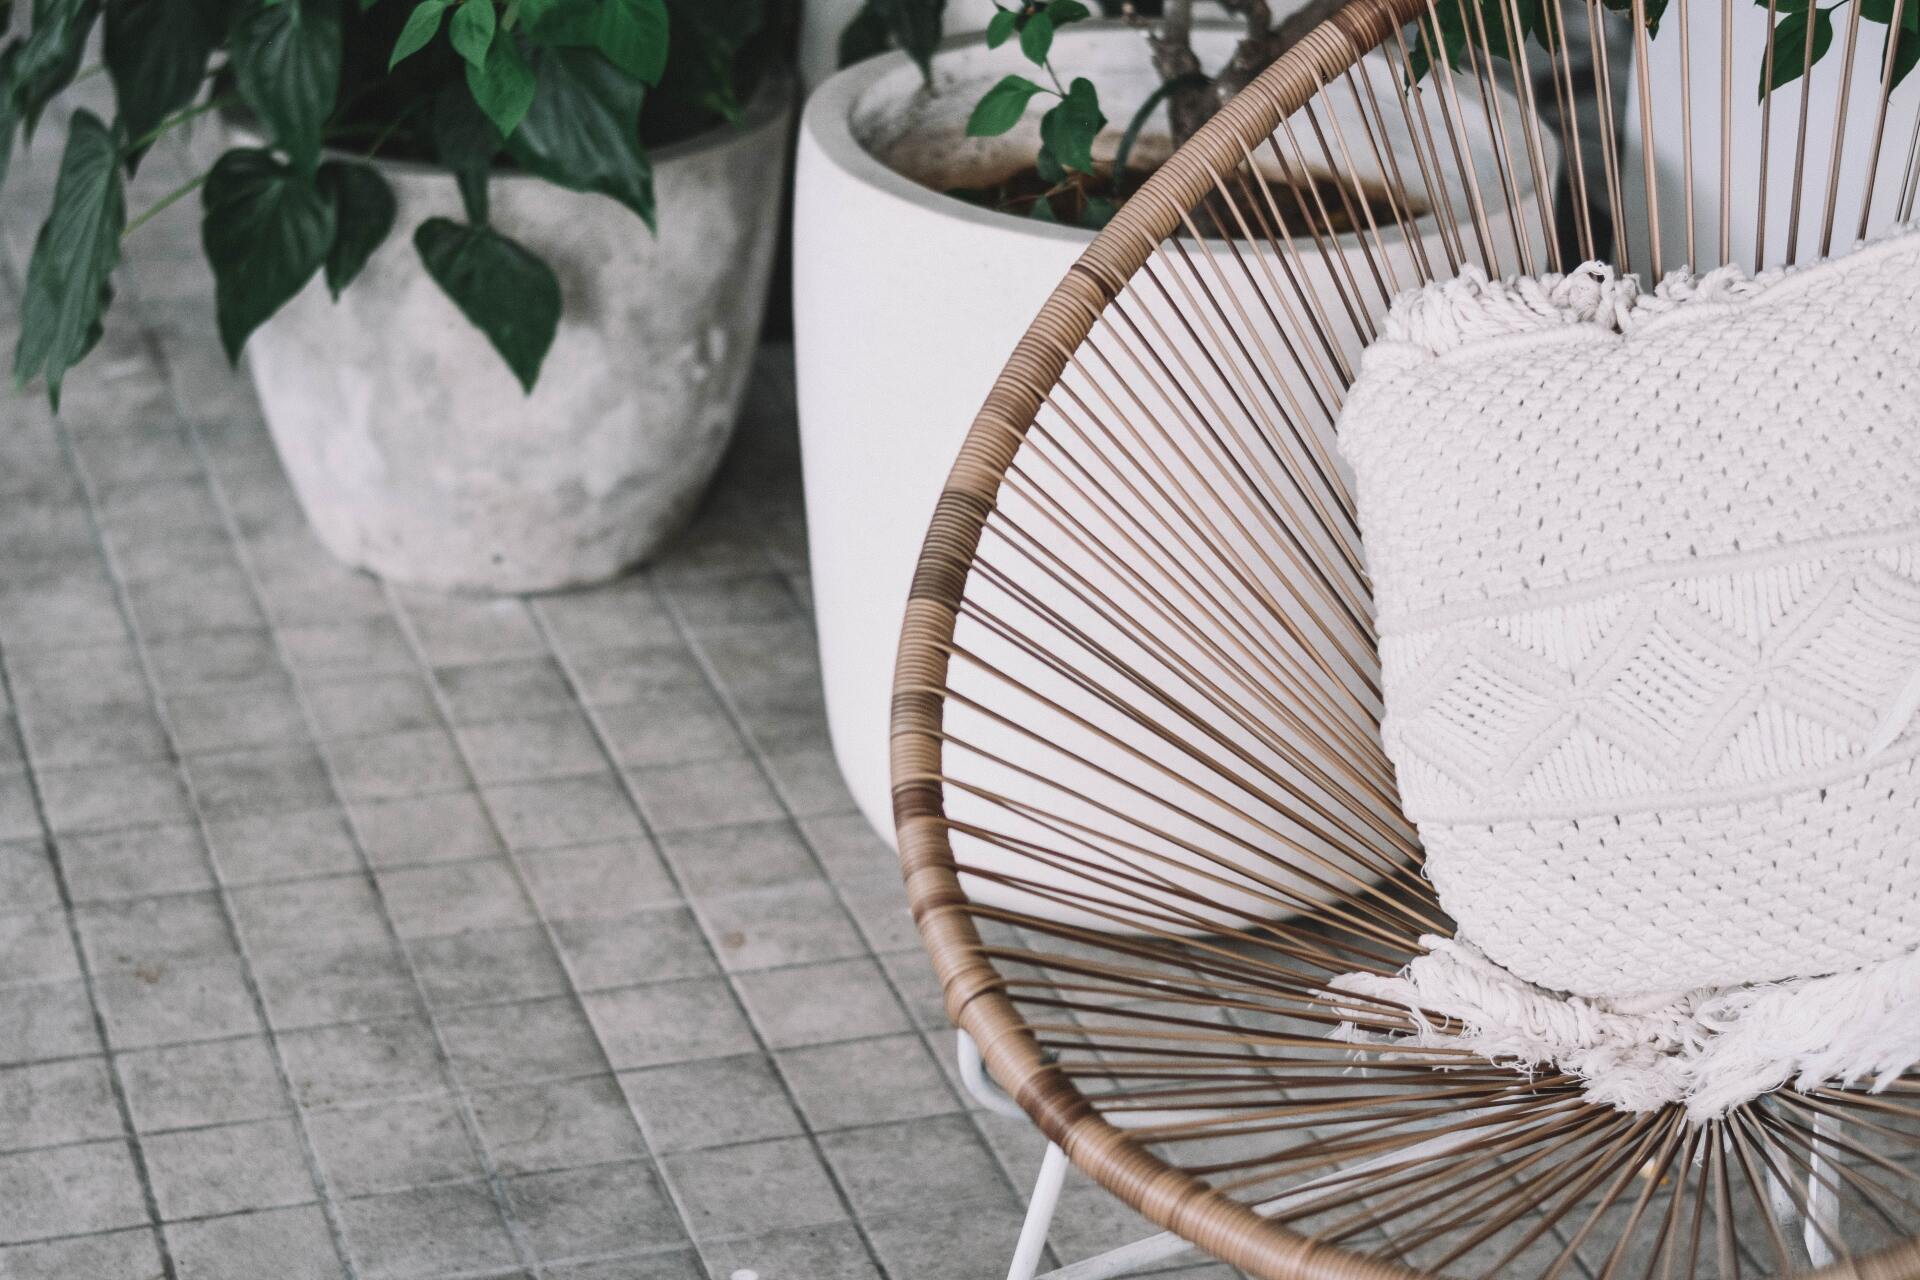 Rattan Chair with Pillow & Plants in White Pots